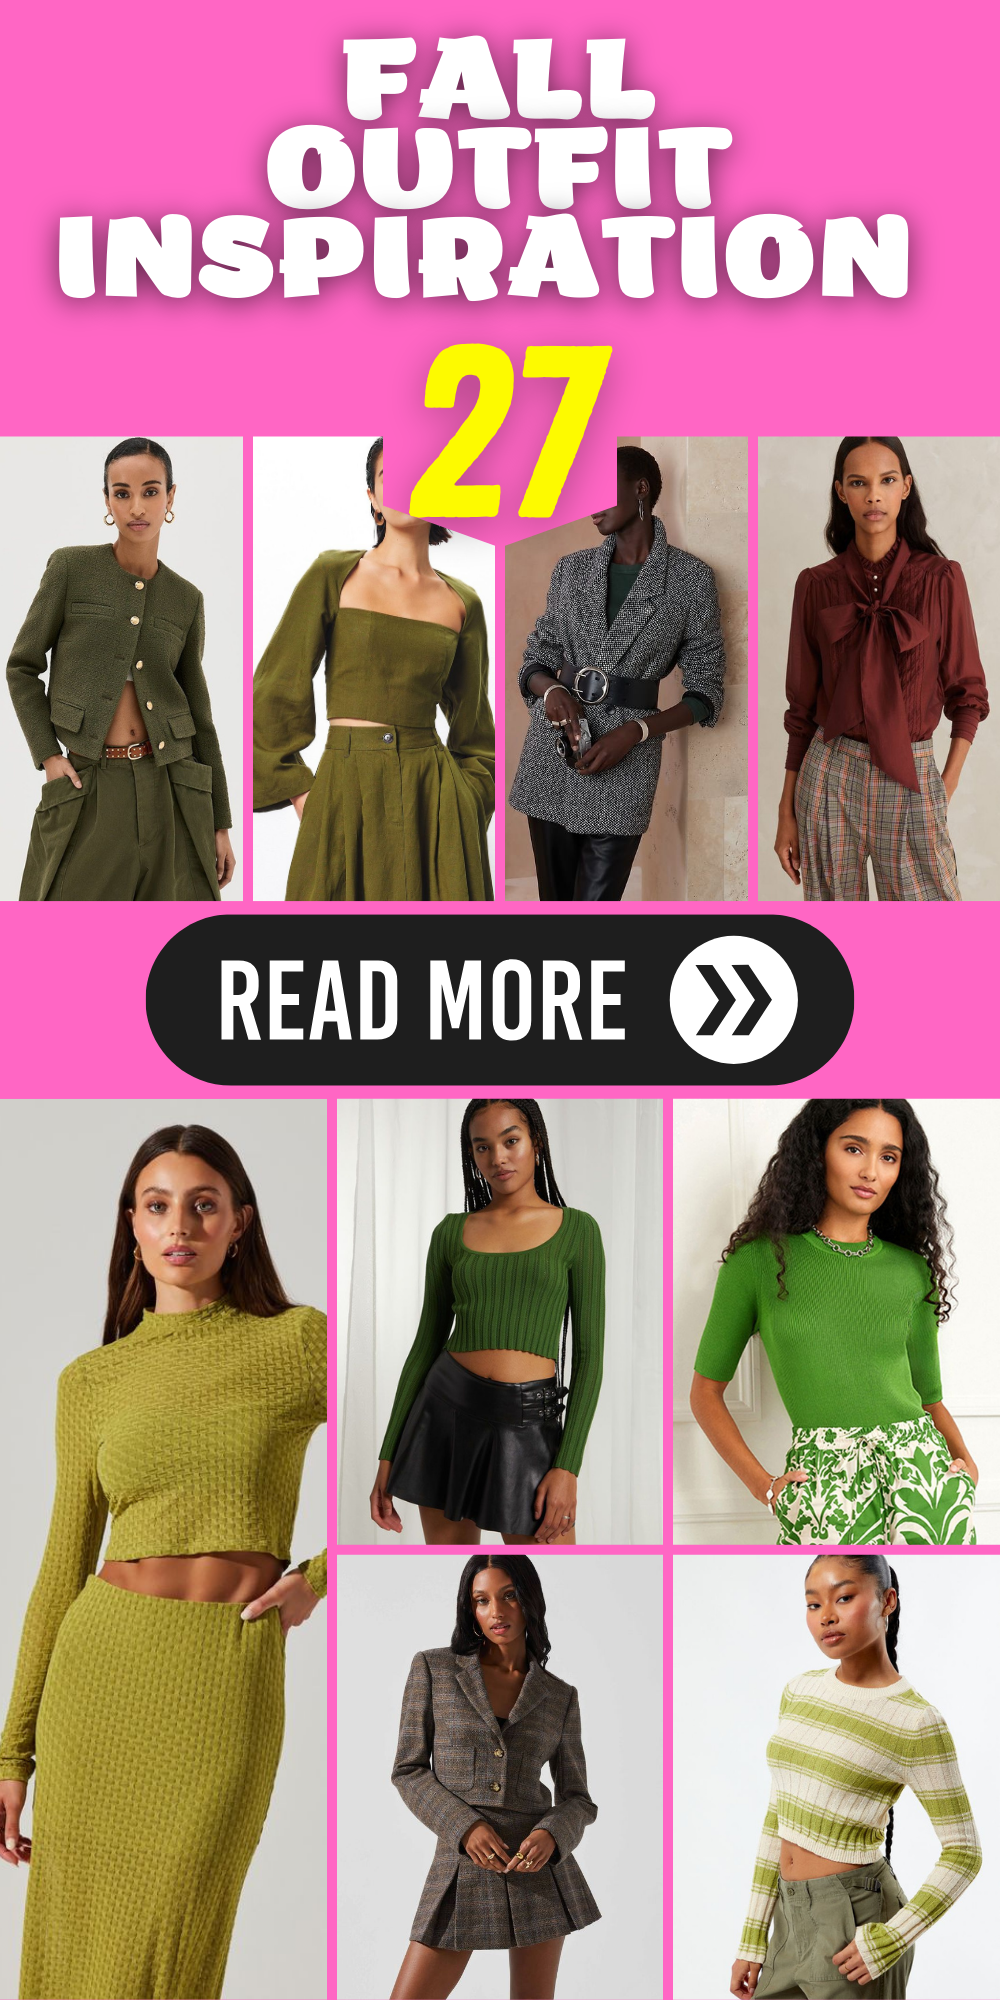 27 Fall Outfit Inspiration Ideas: Stylish Looks for the Season